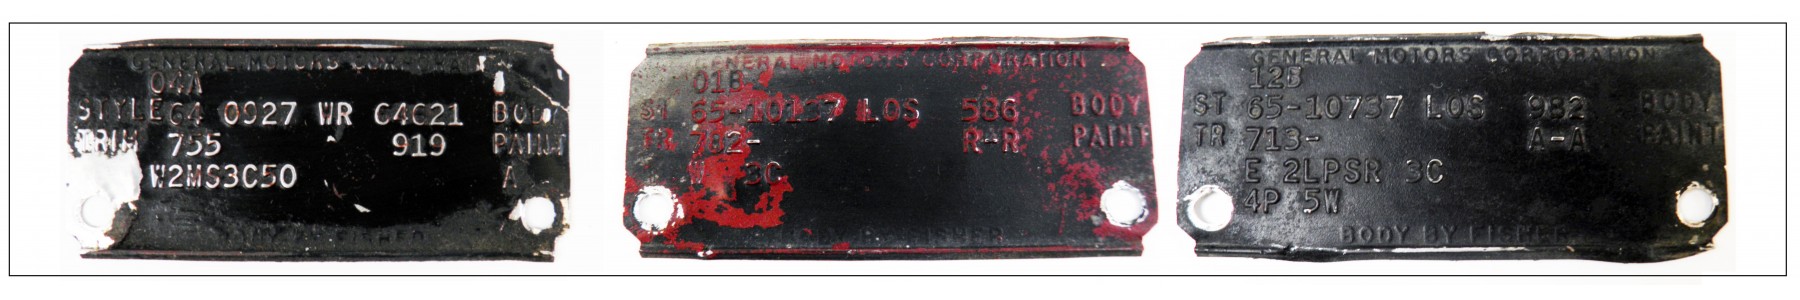 USED 1960 BODY ID TAGS